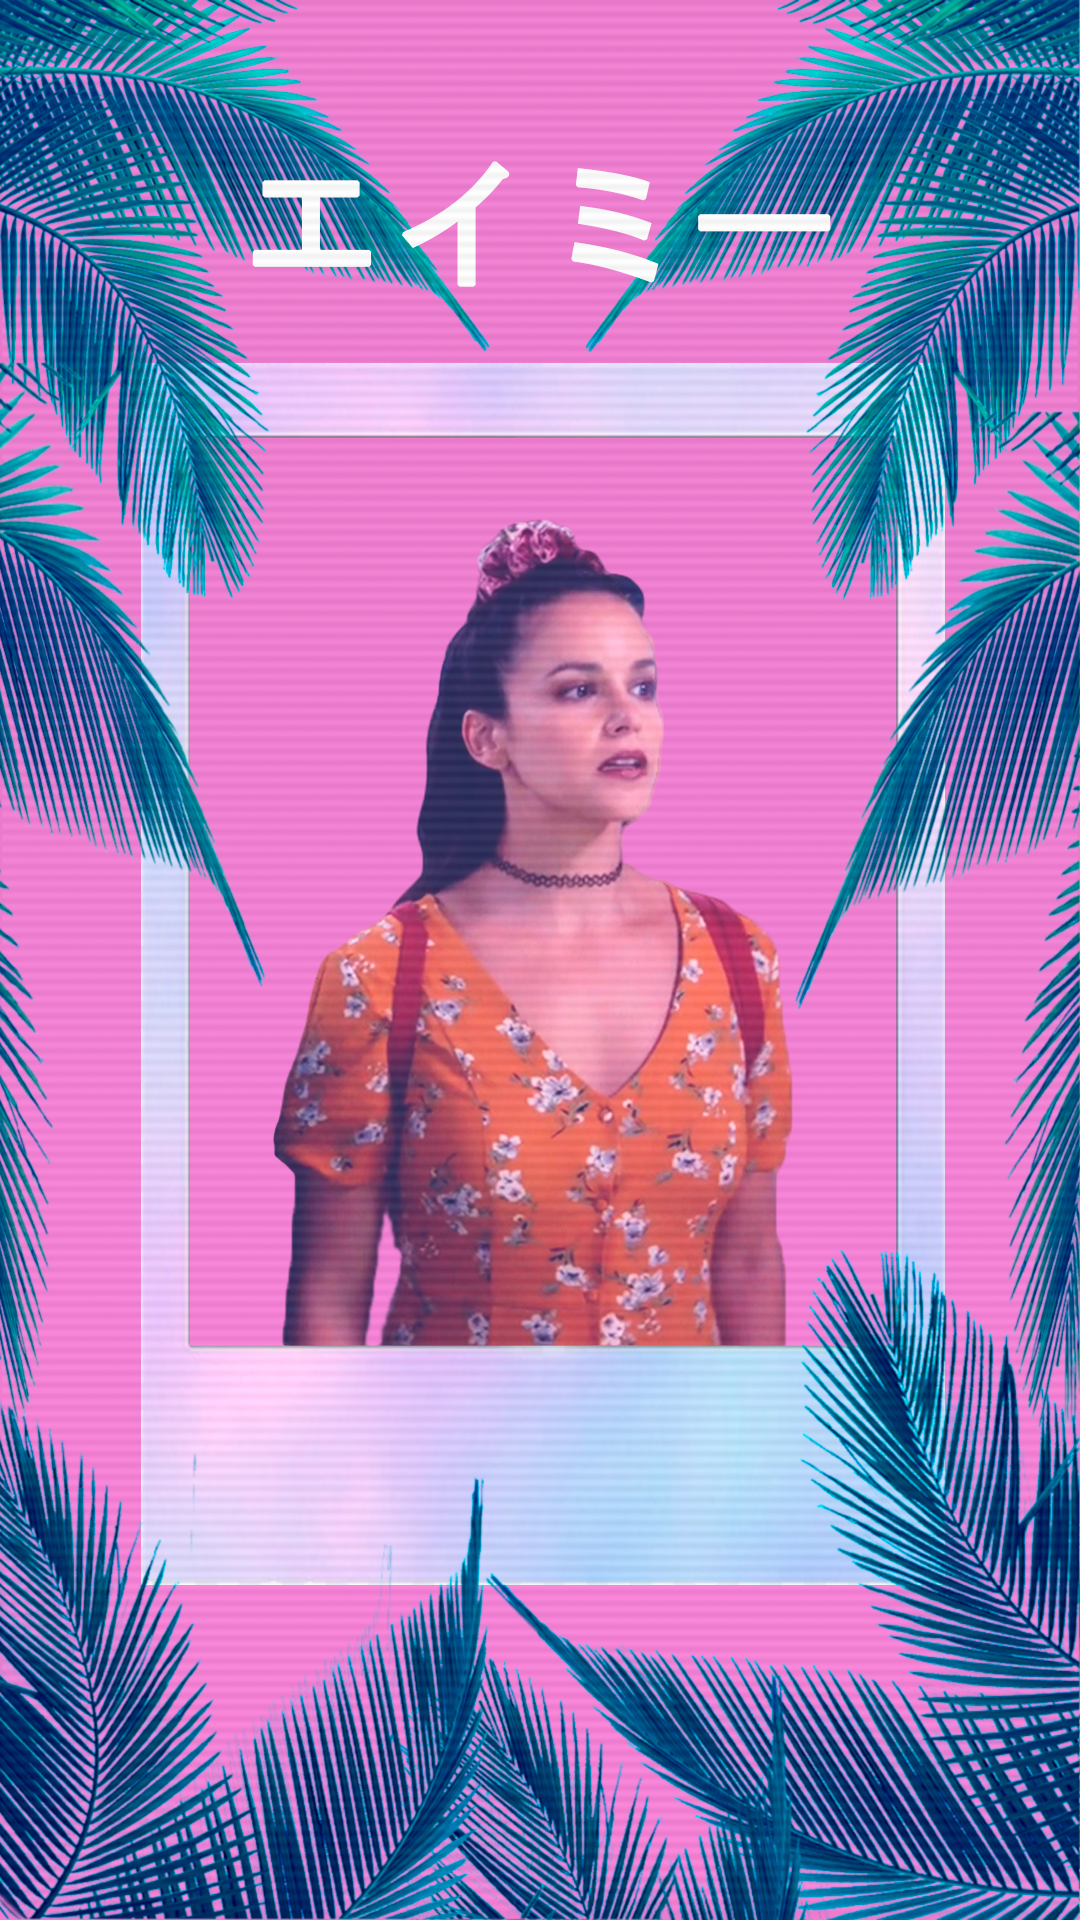 Hello again guys! It's the ｖａｐｏｒｗａｖｅ ａｅｓｔｈｅｔｉｃ phone wallpaper guy again. Some people here told me the text I used in my other version wasn't the best option, so I corrected it